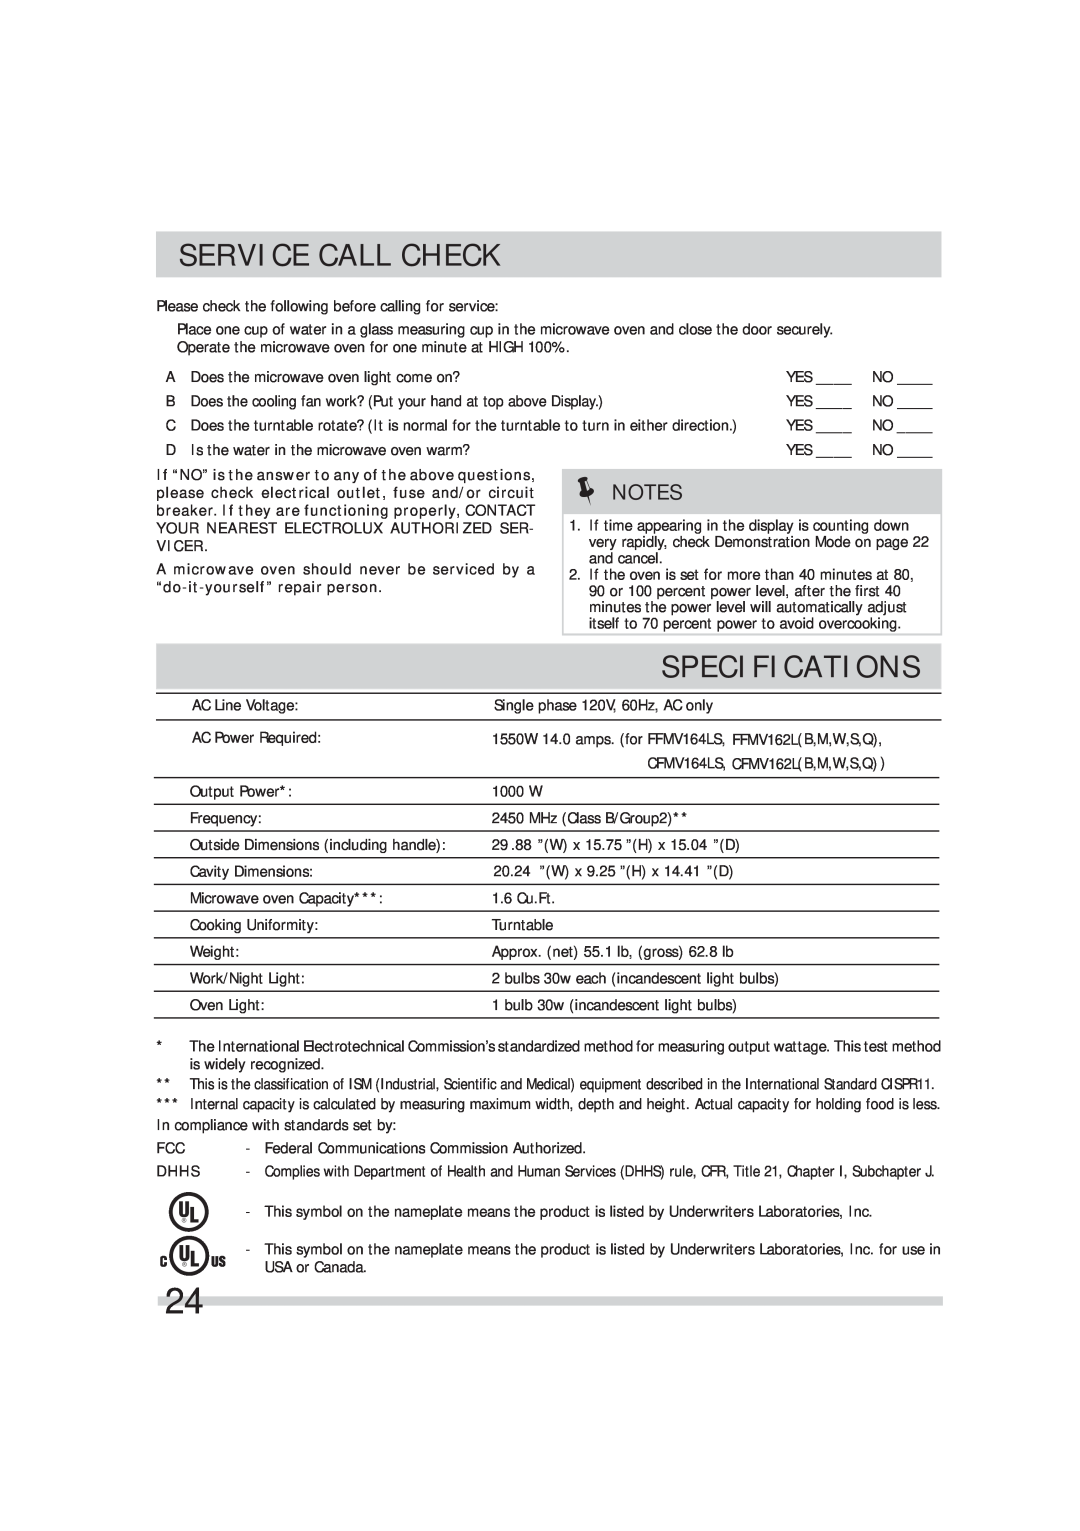 Frigidaire FFMV162LW Service Call Check, Specifications, Your Nearest Electrolux Authorized Ser, Vicer, and cancel, Dhhs 